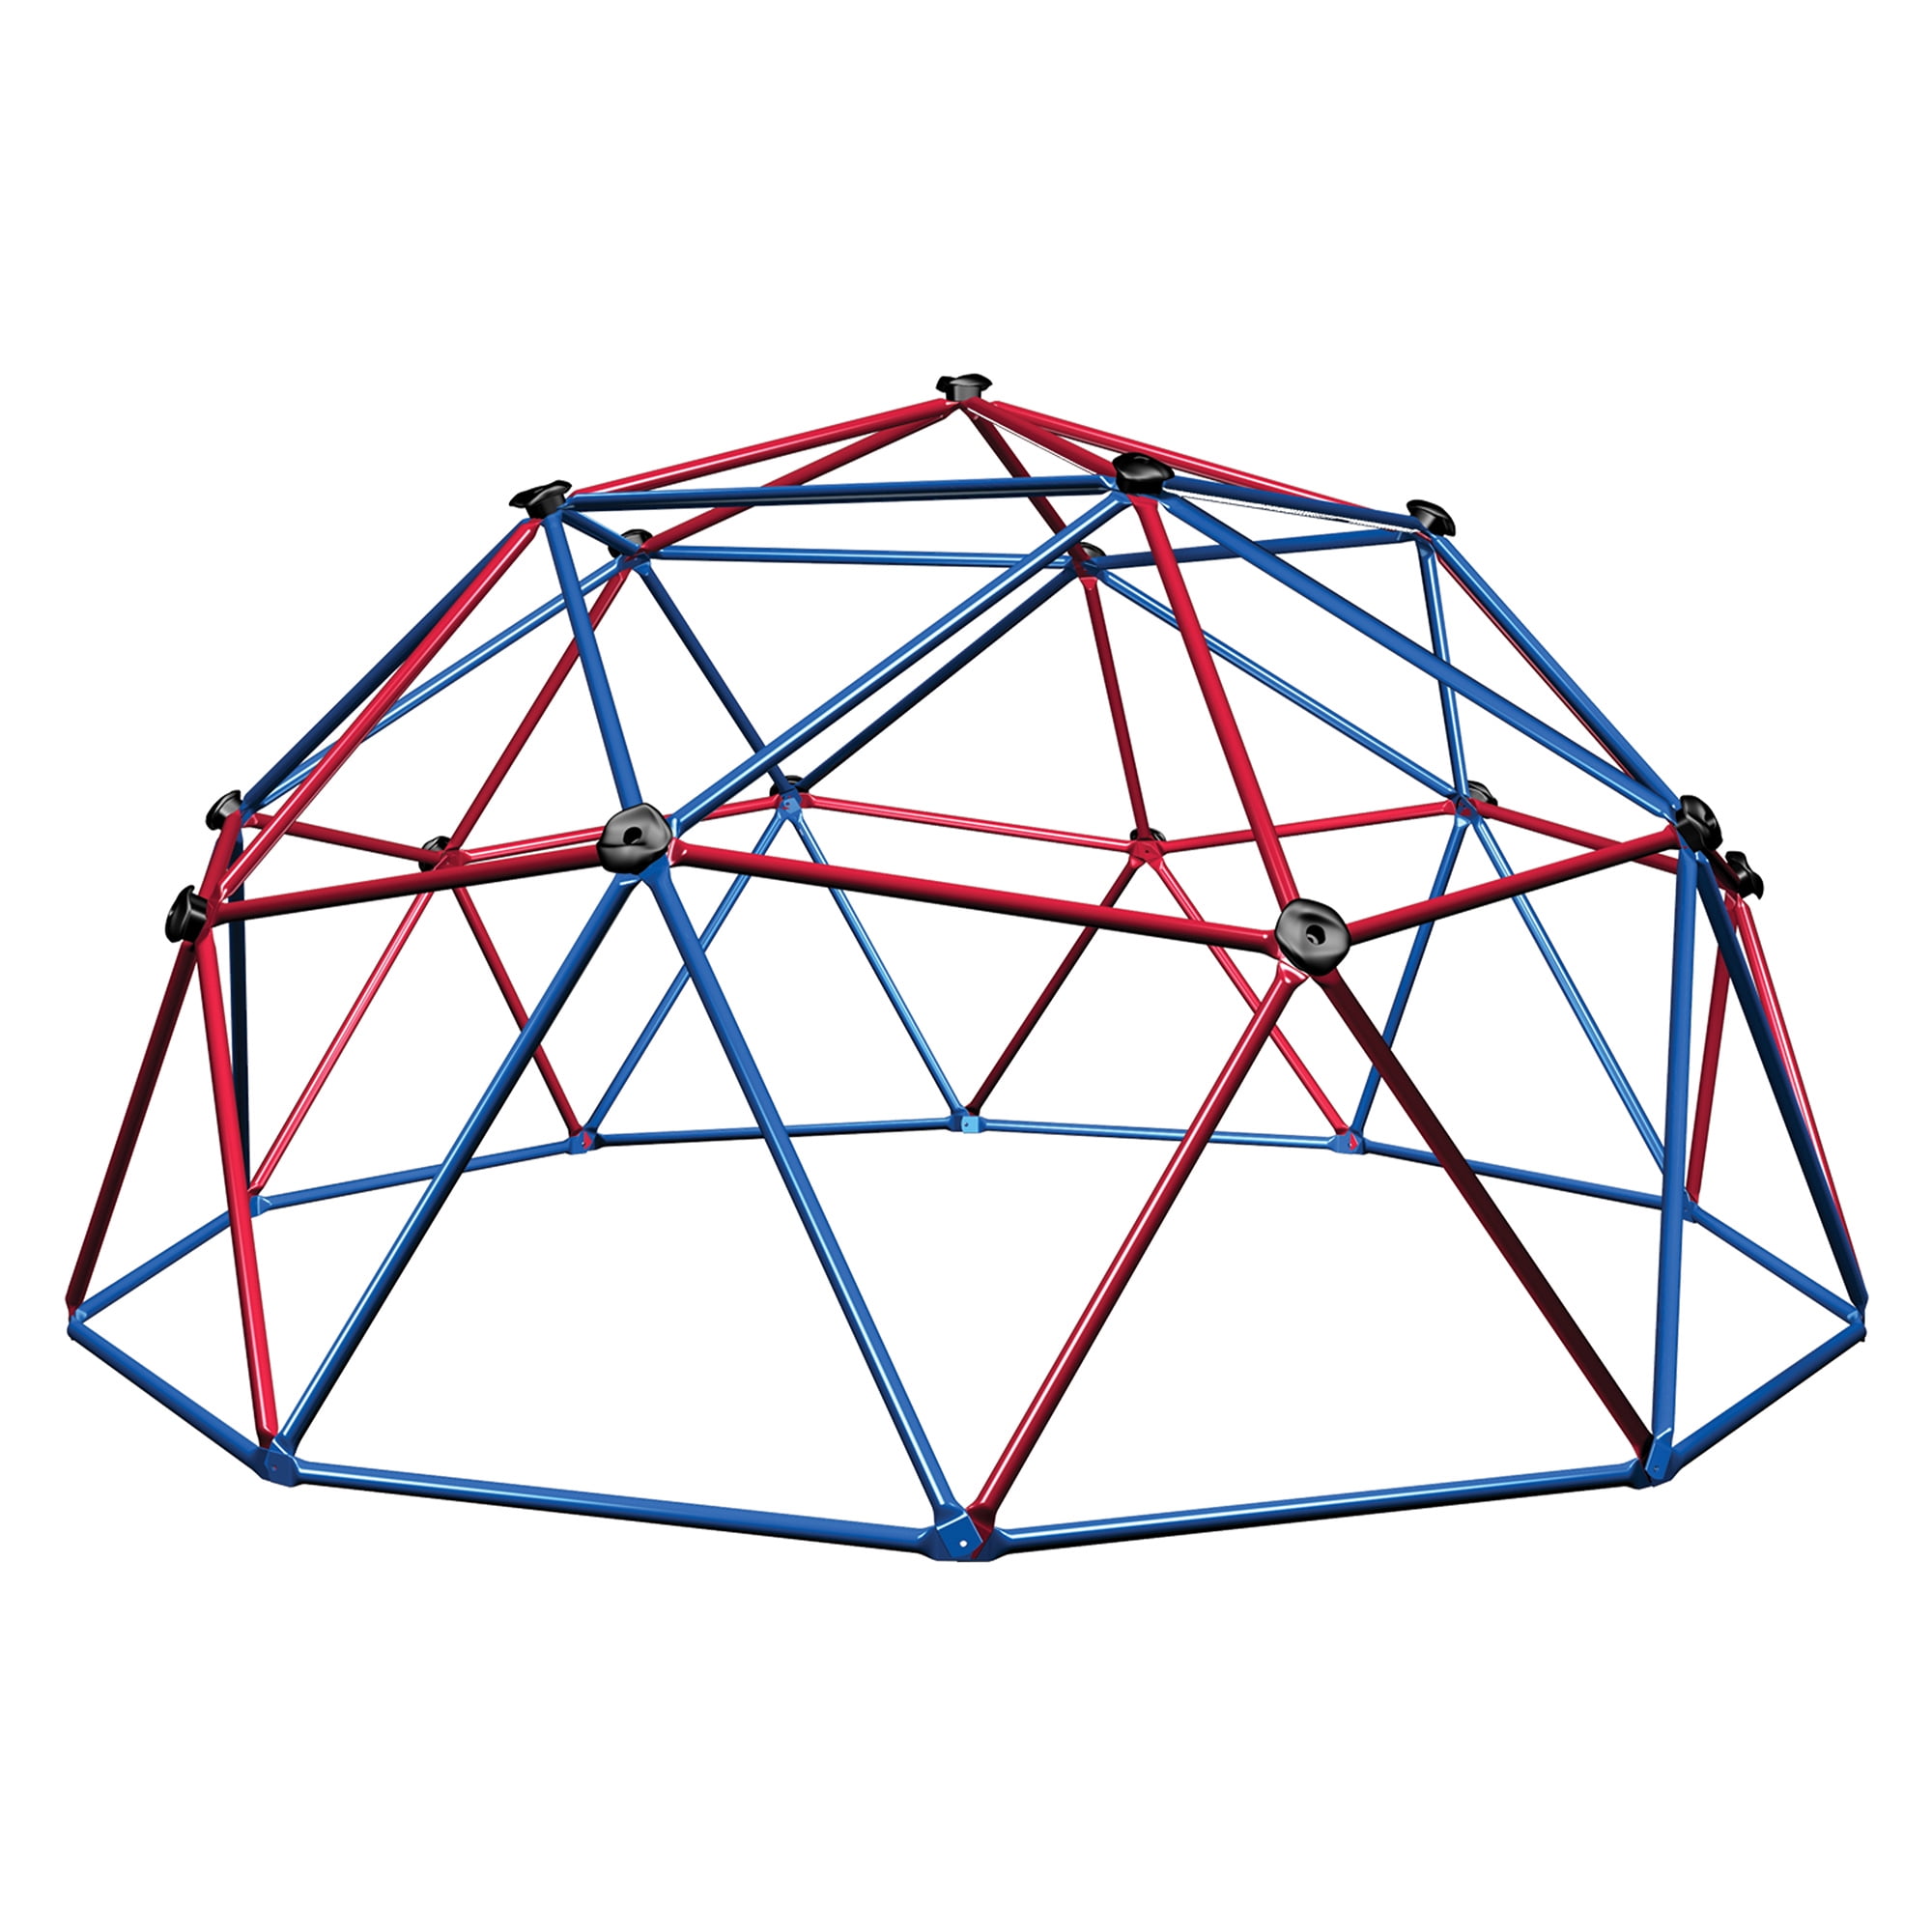 Lifetime Geometric 60" Climbing Dome for sale online 90136